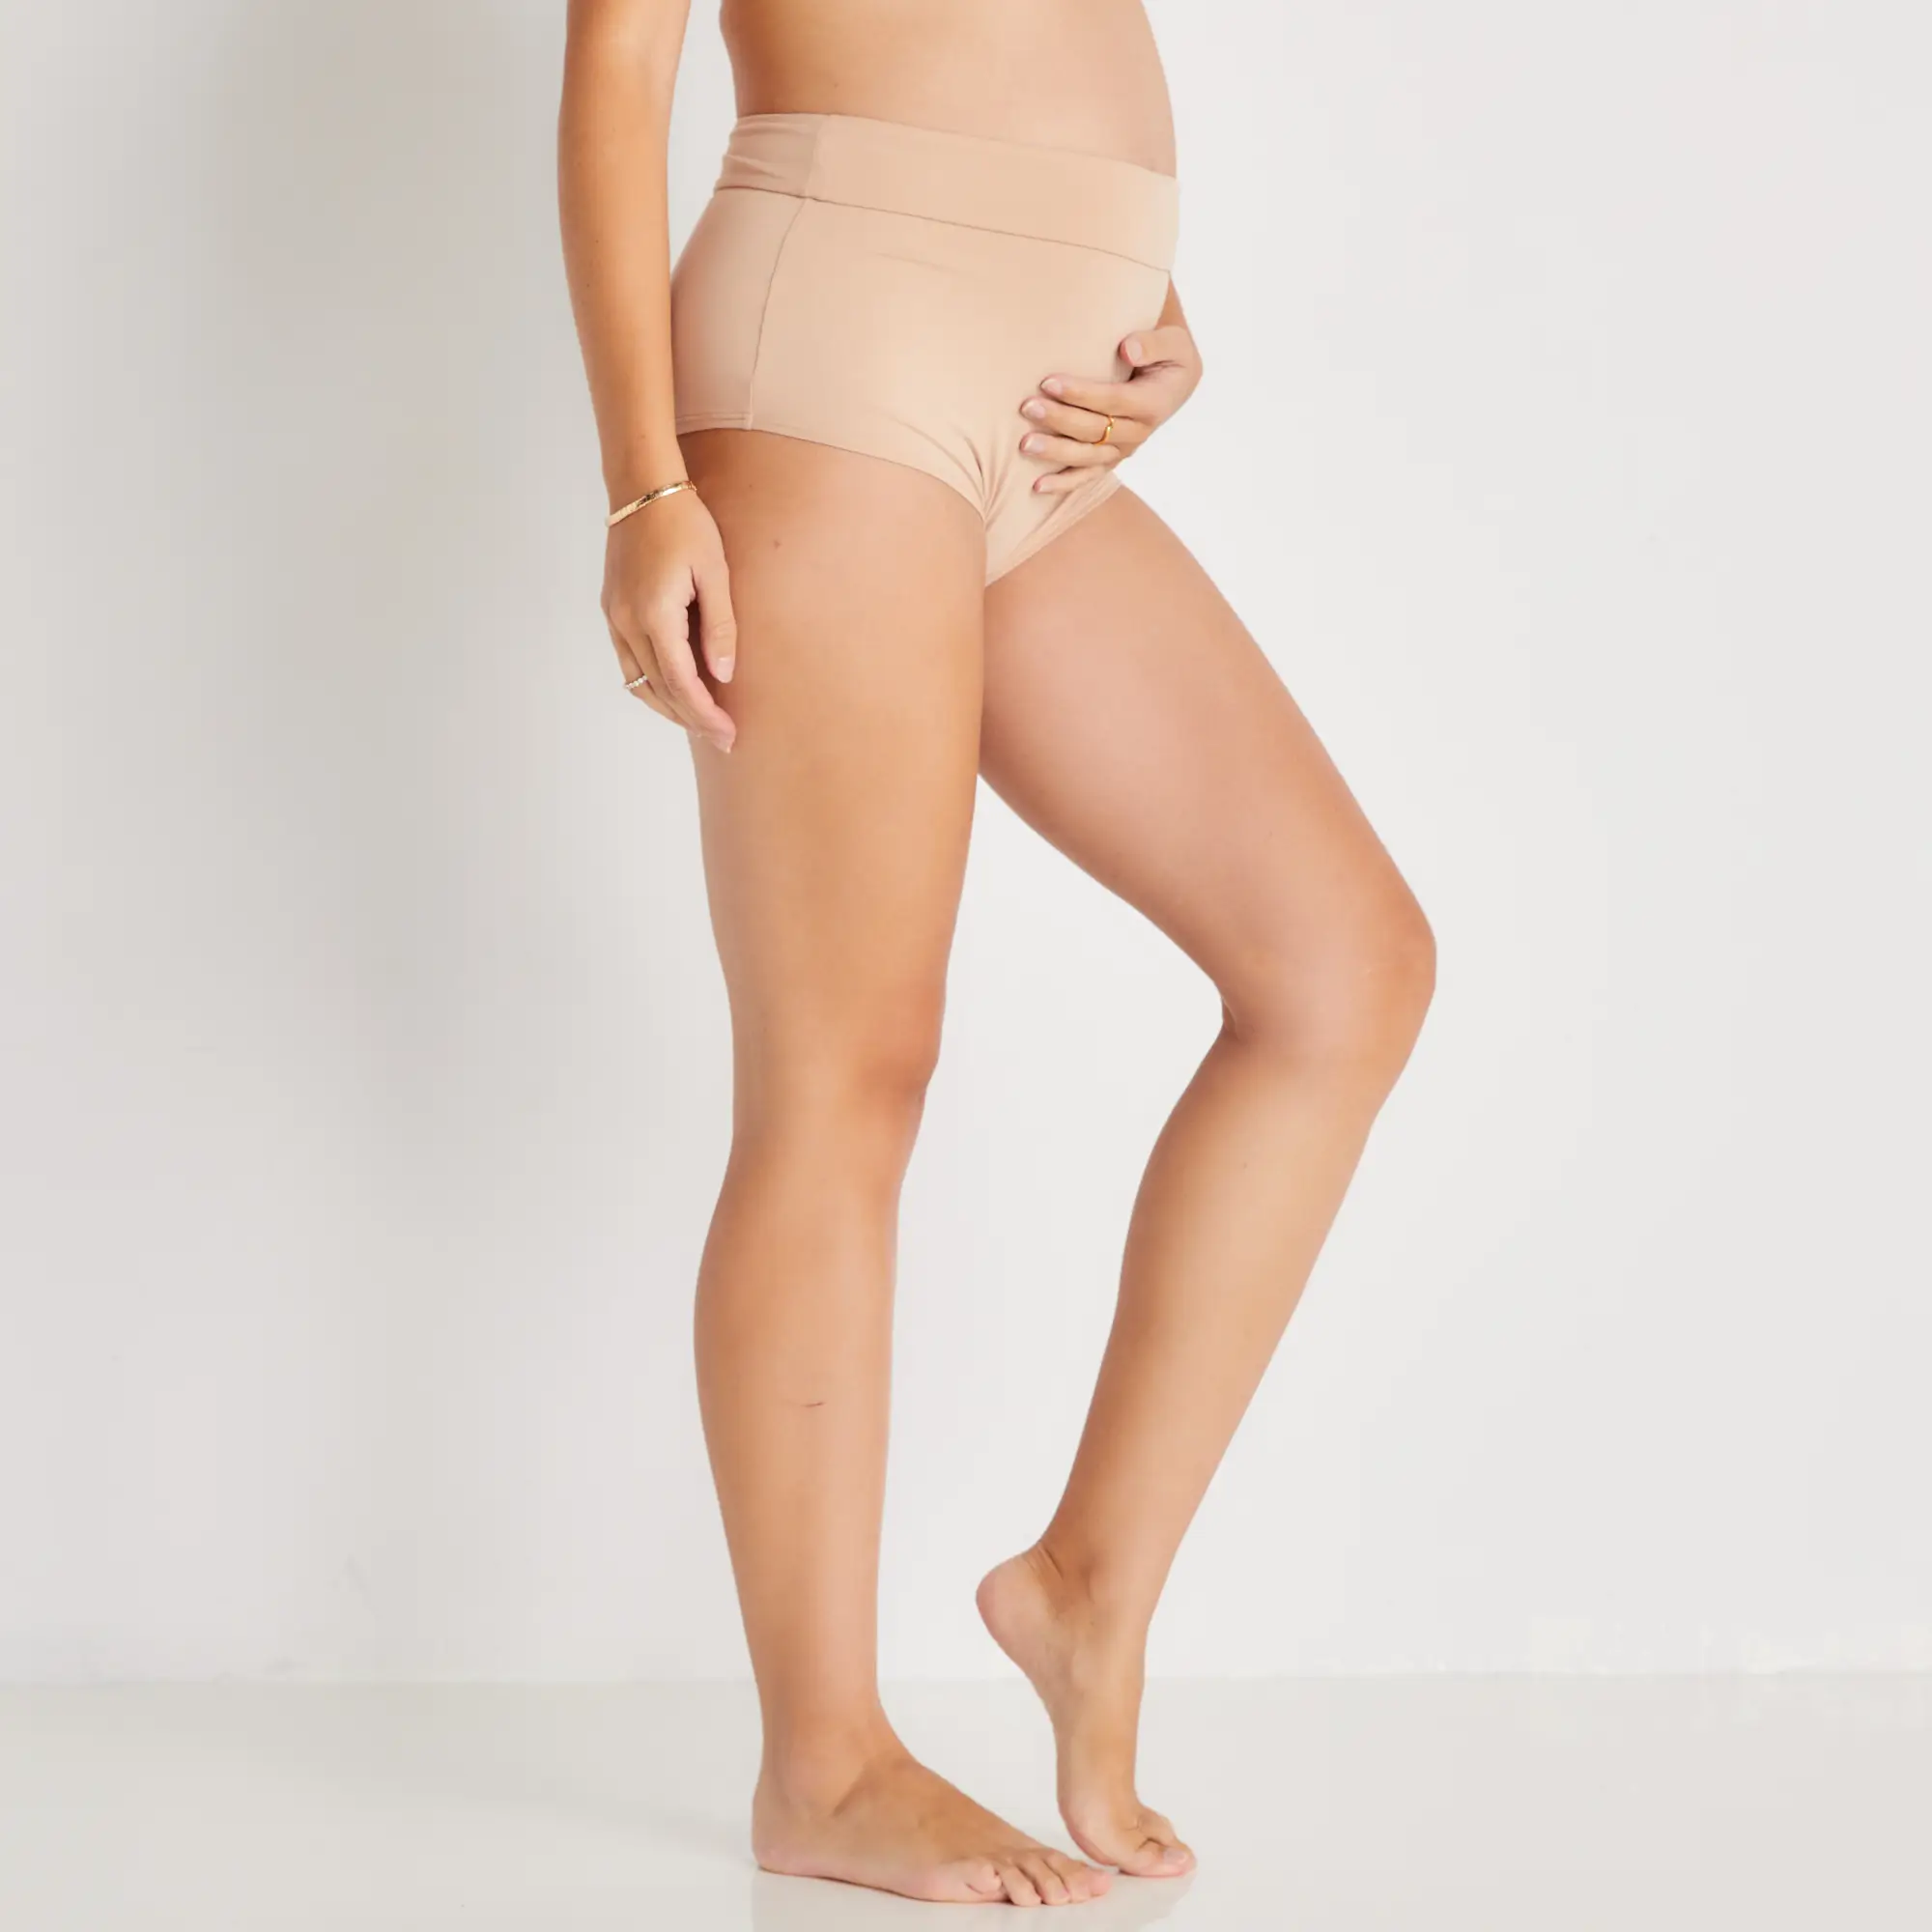 https://partyoftwomaternity.com/wp-content/uploads/party-of-two-the-maternity-and-postpartum-boyshort-sand-2.webp